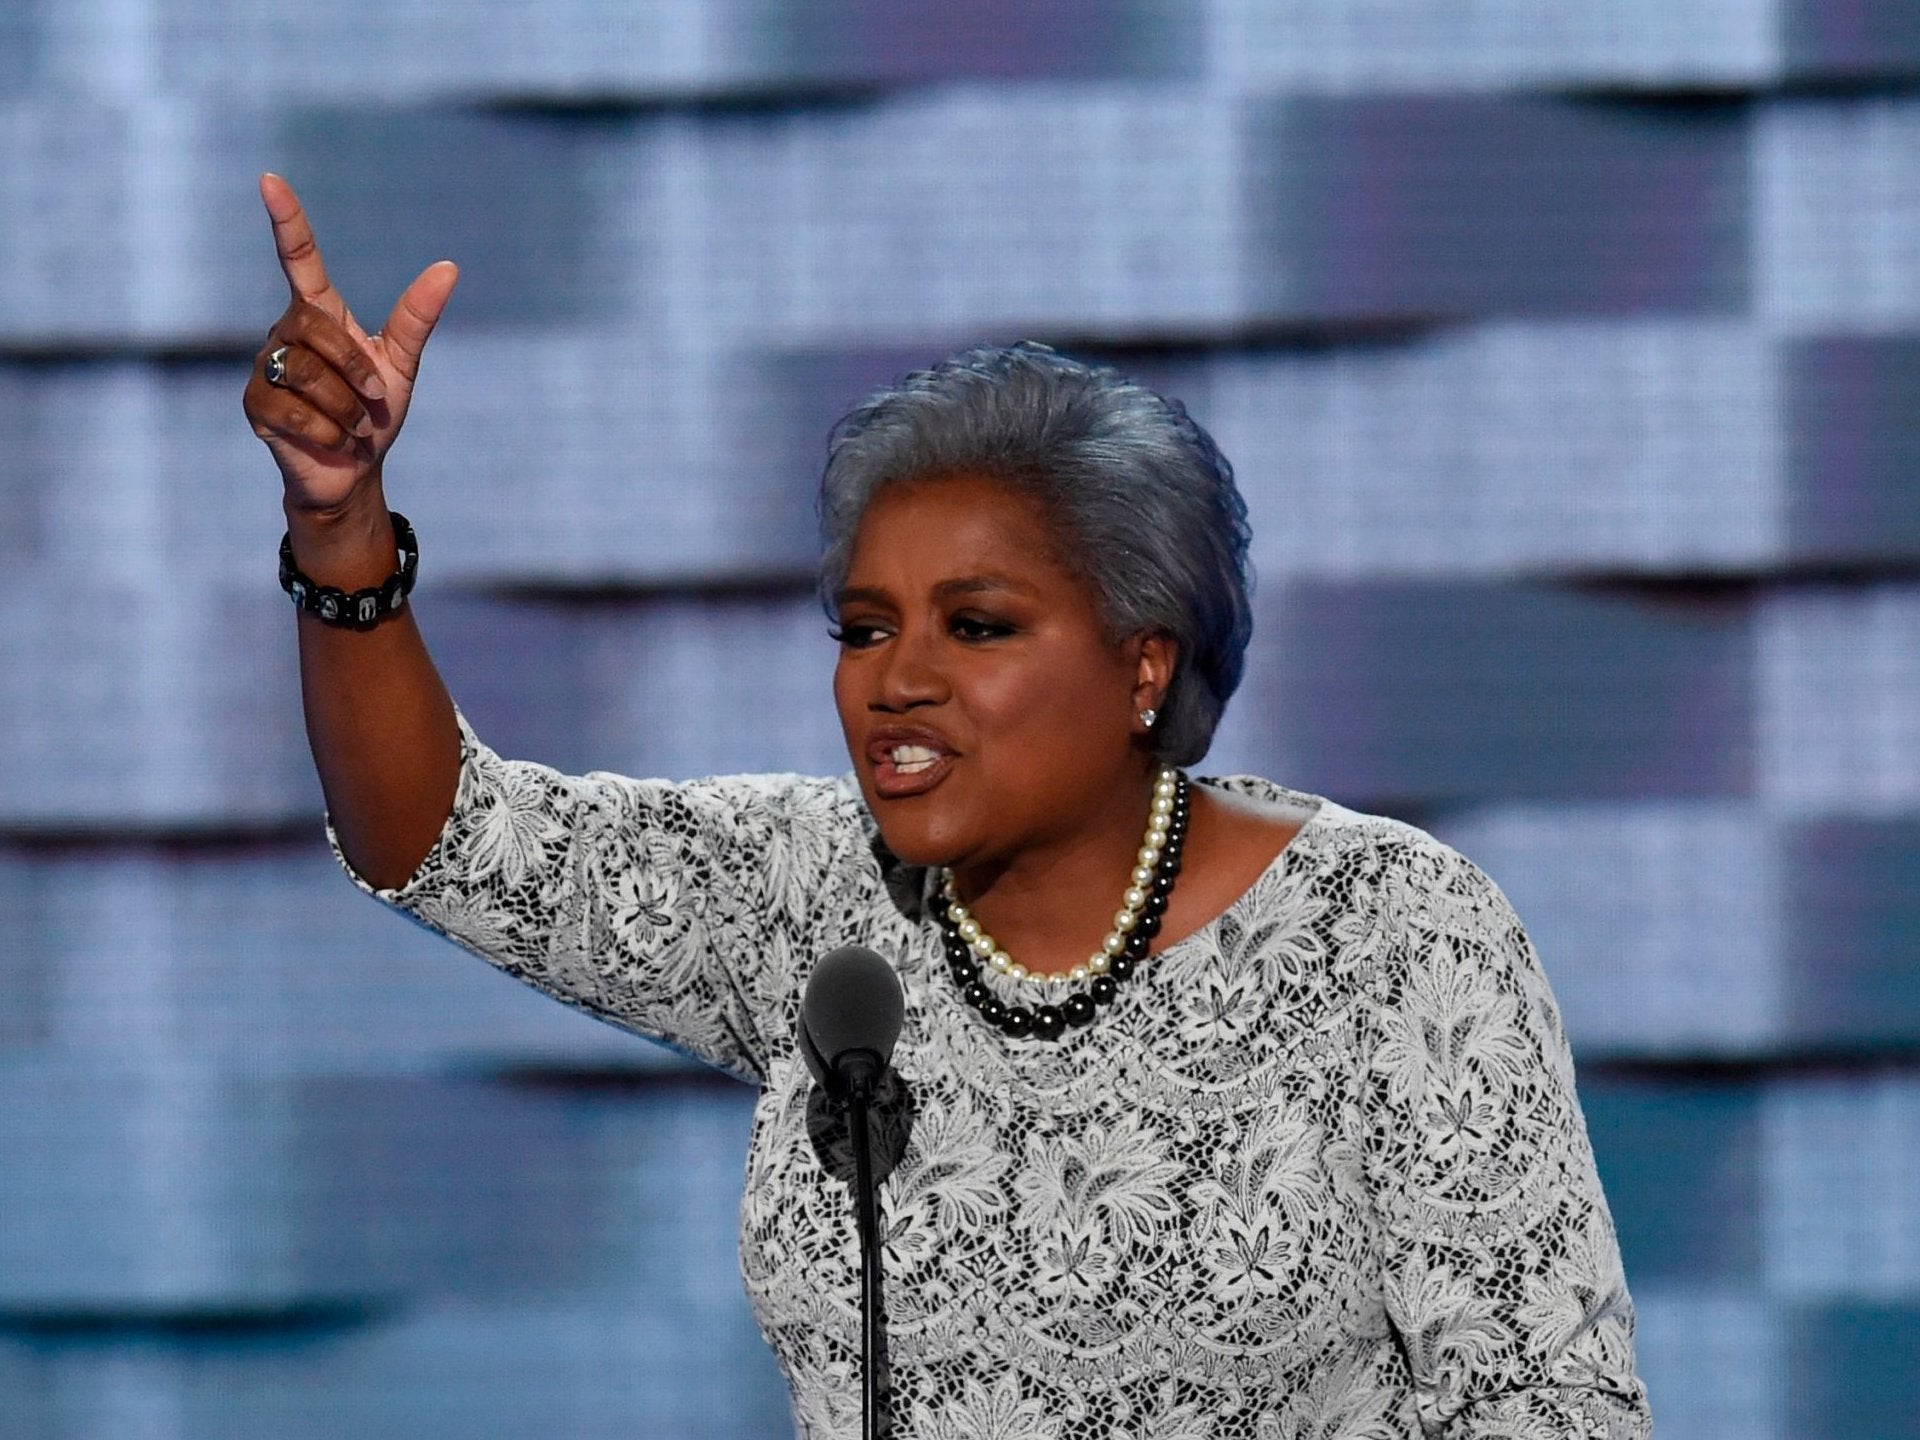 Fox News hires former DNC chair Donna Brazile who left CNN after tipping off Clinton about 2016 debate questions